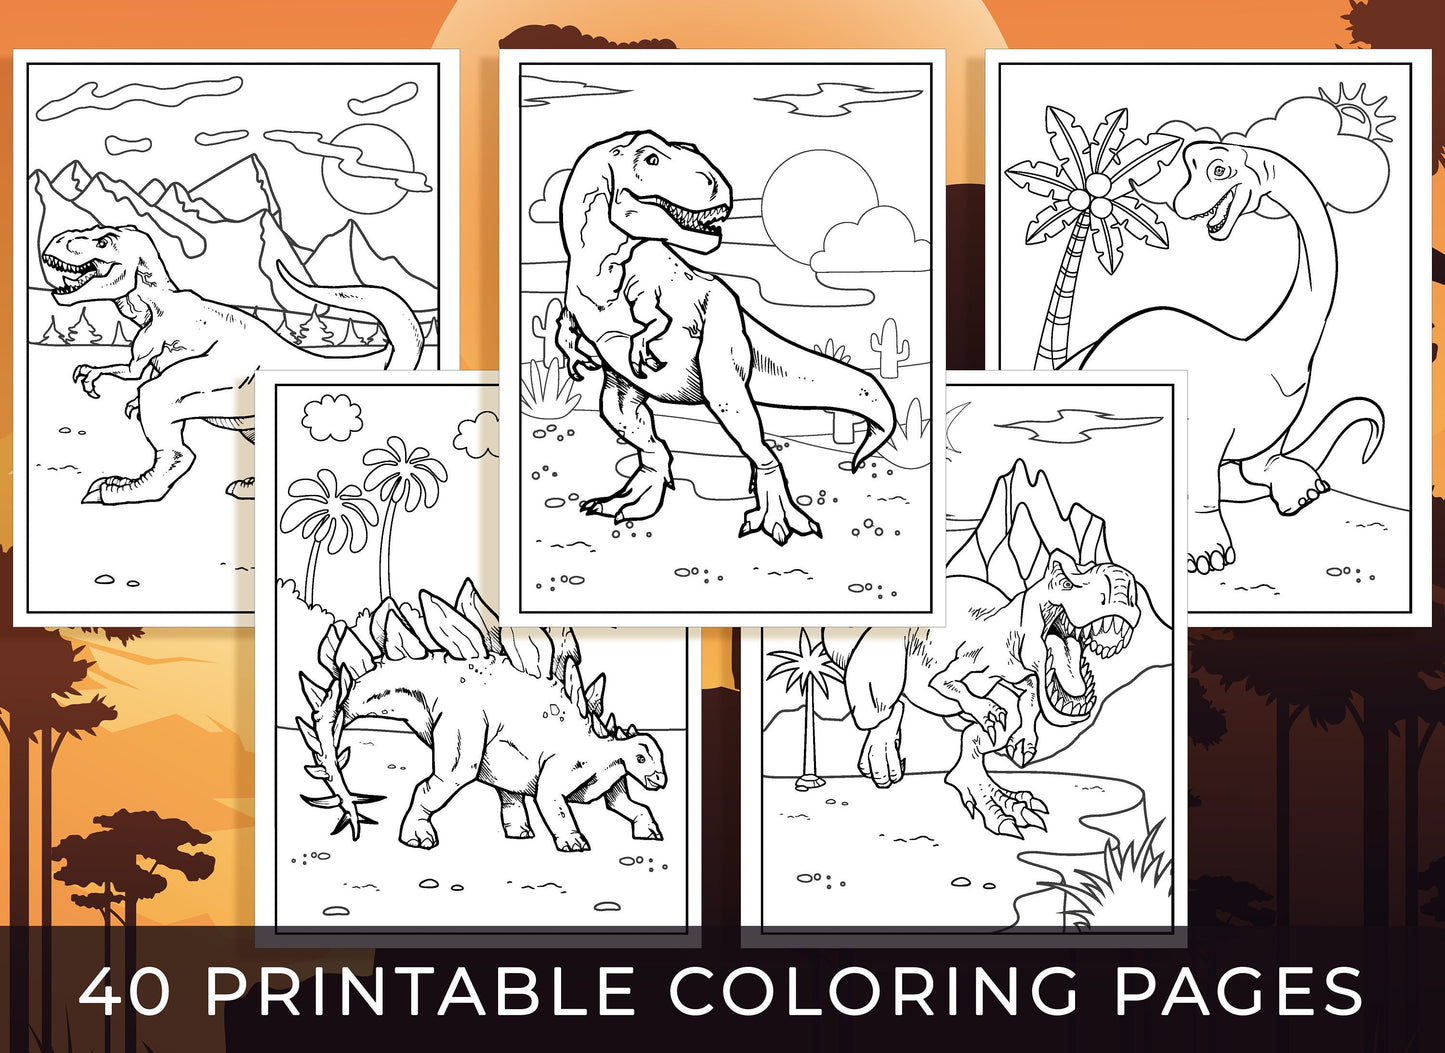 Dinosaur Coloring Pages - 40 Printable Dinosaur Coloring Pages for Boys, Teens & Kids, Dinosaur Birthday Party Activity, Boys Birthday Party